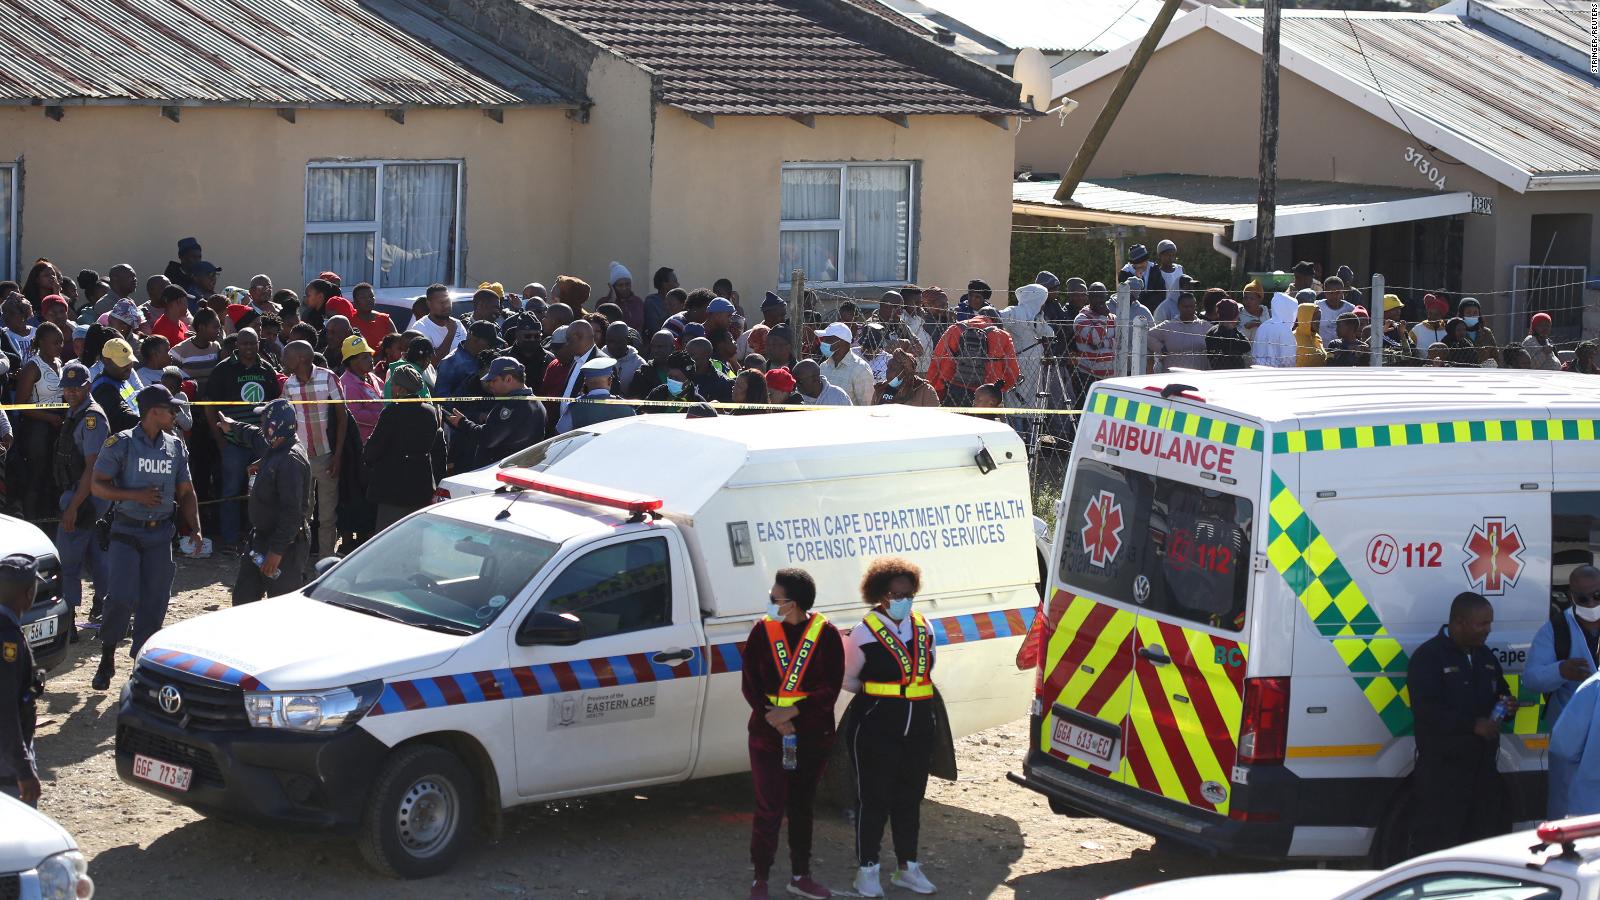 22 young people, including children under 13, die in an incident in a tavern in South Africa